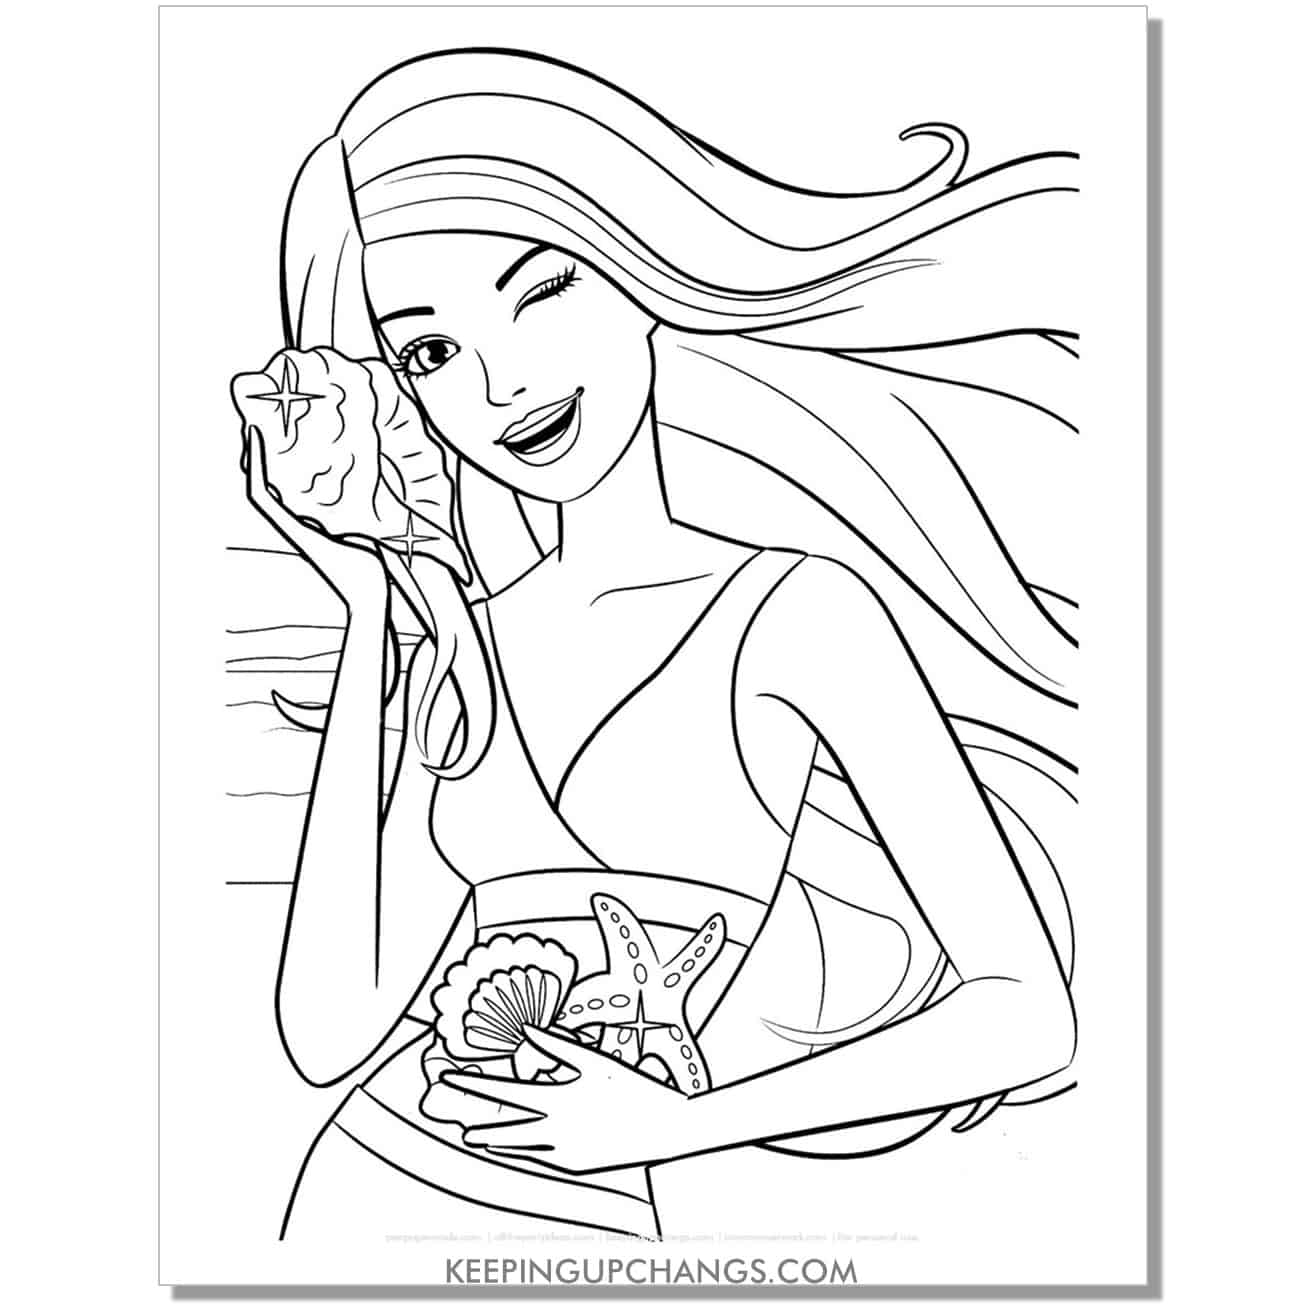 barbie starfish, listening to ocean in seashell coloring page.